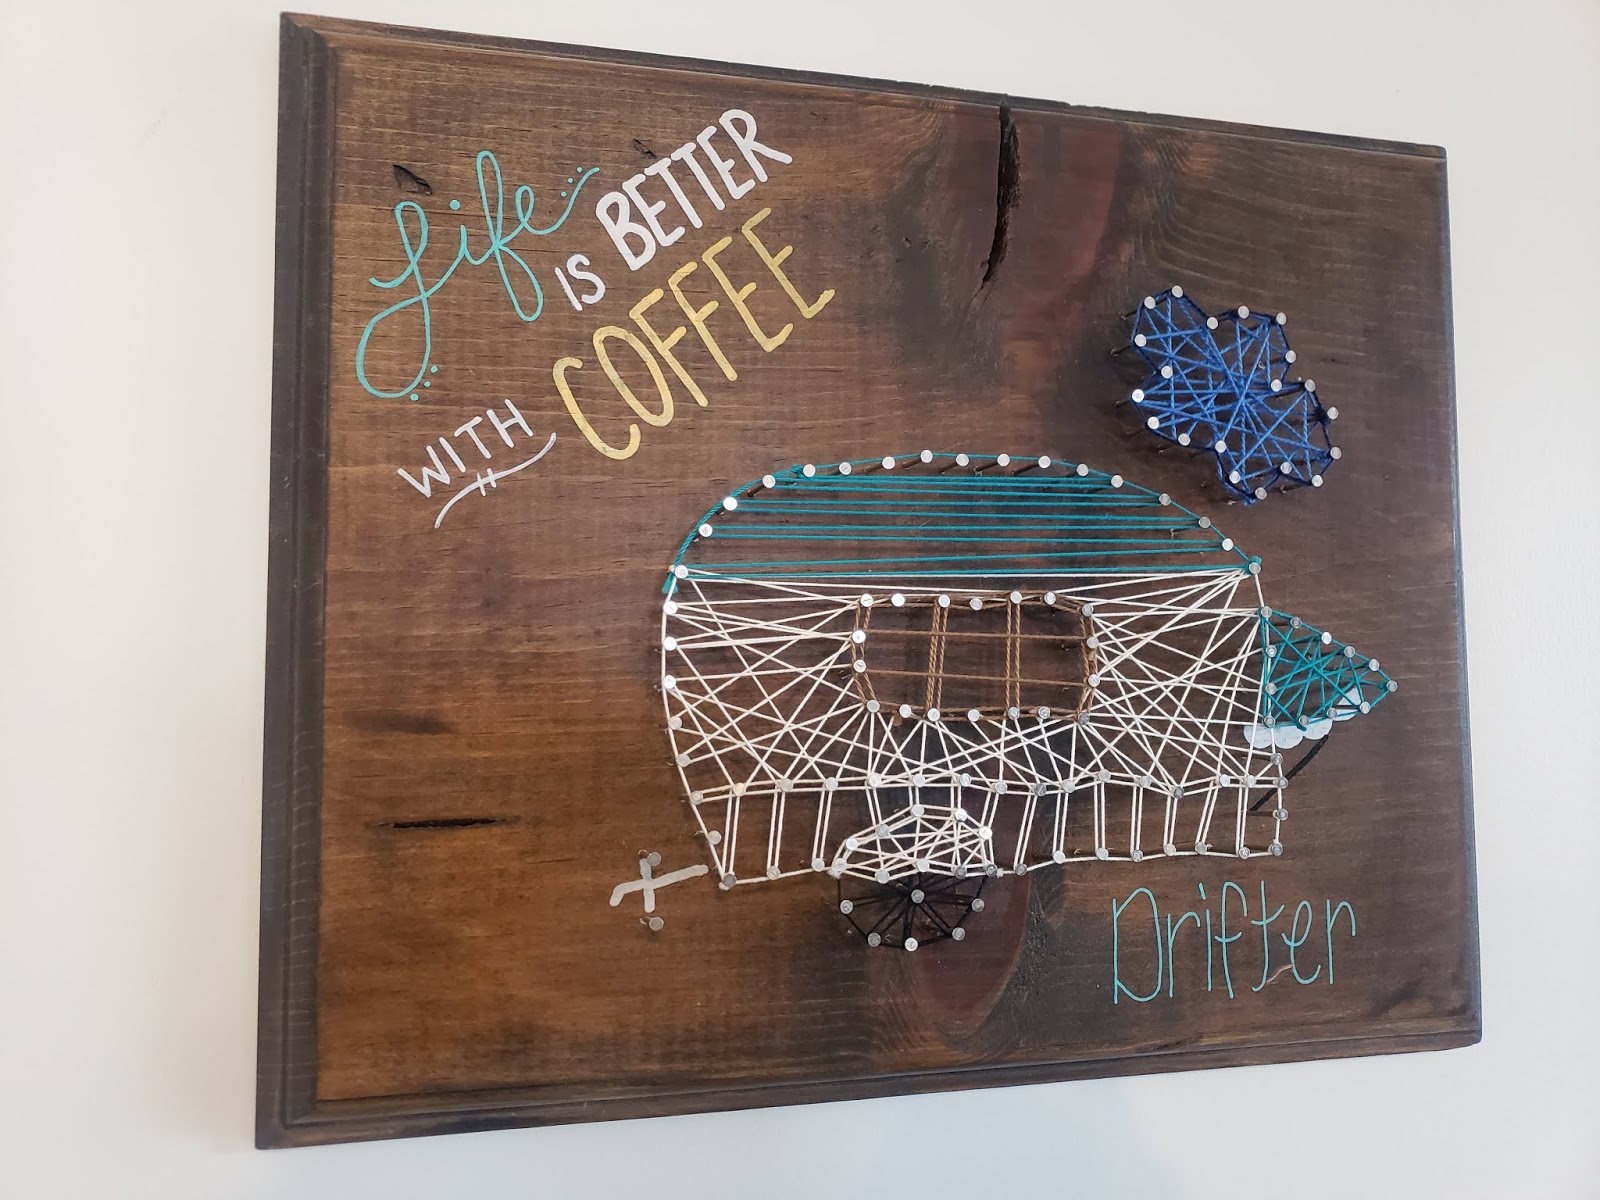 Drifter Coffee to Open Brick and Mortar Location in Ferndale - 100.7  Ferndale Radio